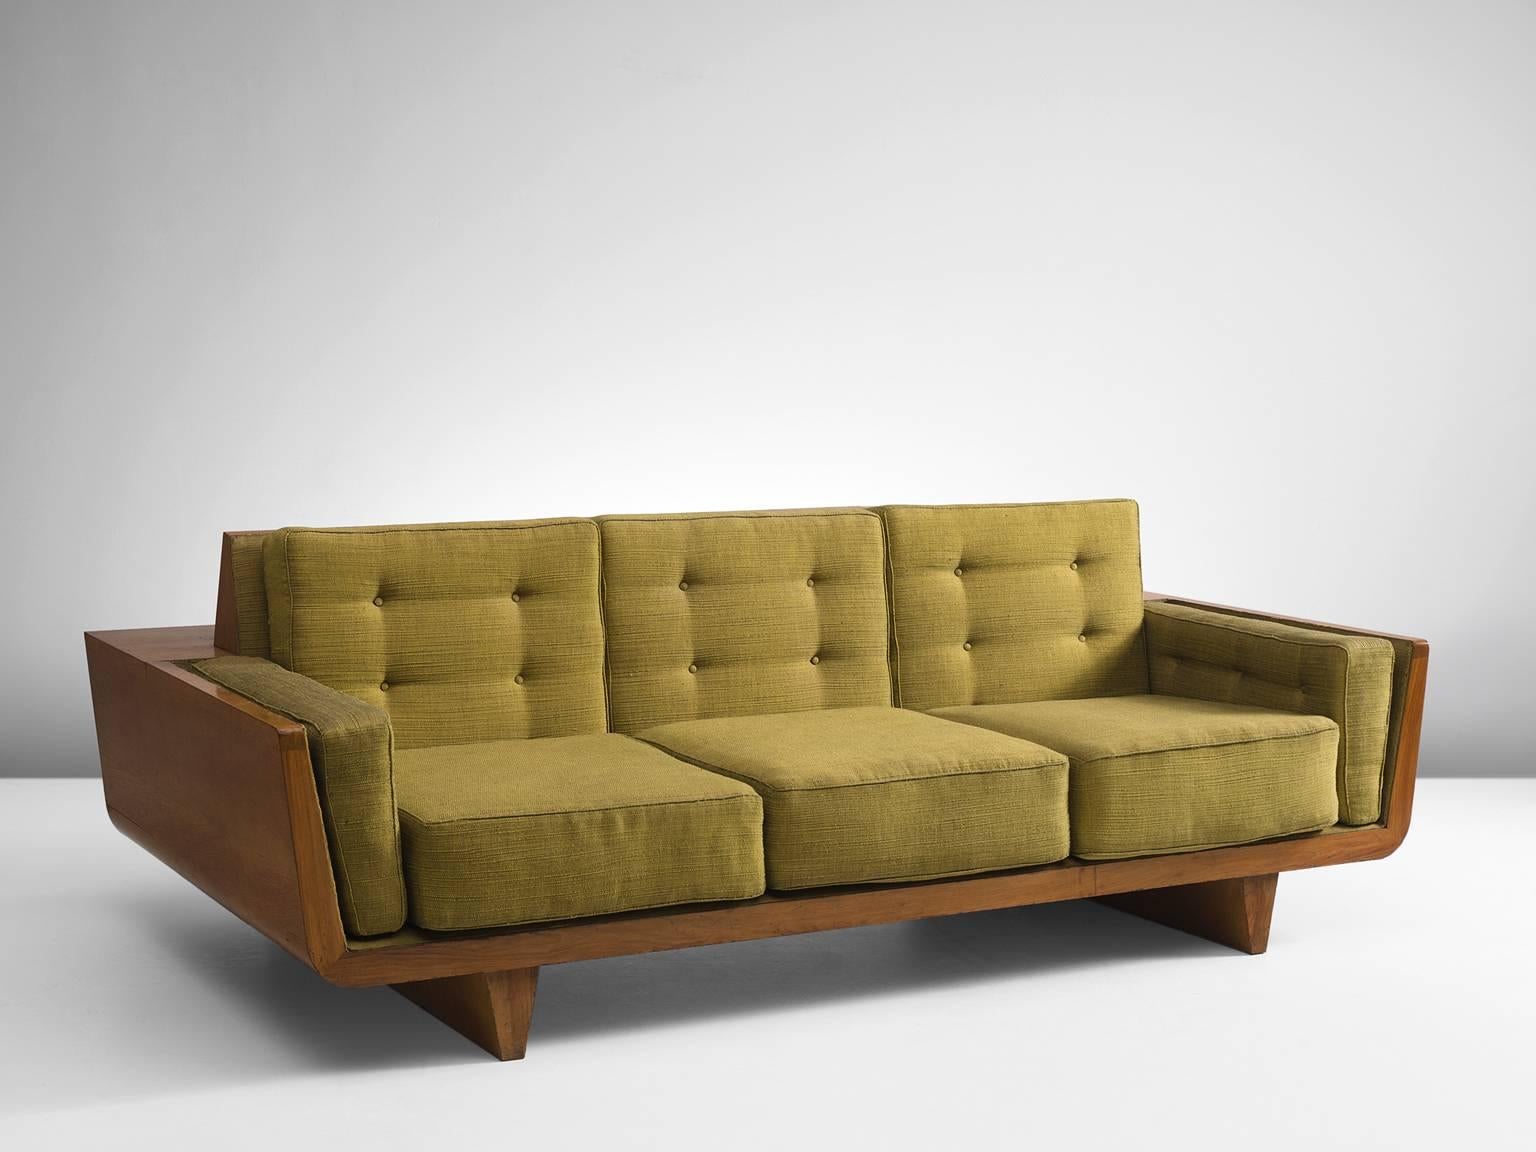 Sofa, walnut wood with green fabric, Italy, ca. 1950

This sculptural sofa is executed with walnut and has several removable cushions that are covered in a green fabric. The frame of the sofa is geometric and has pyramid legs that work well with the